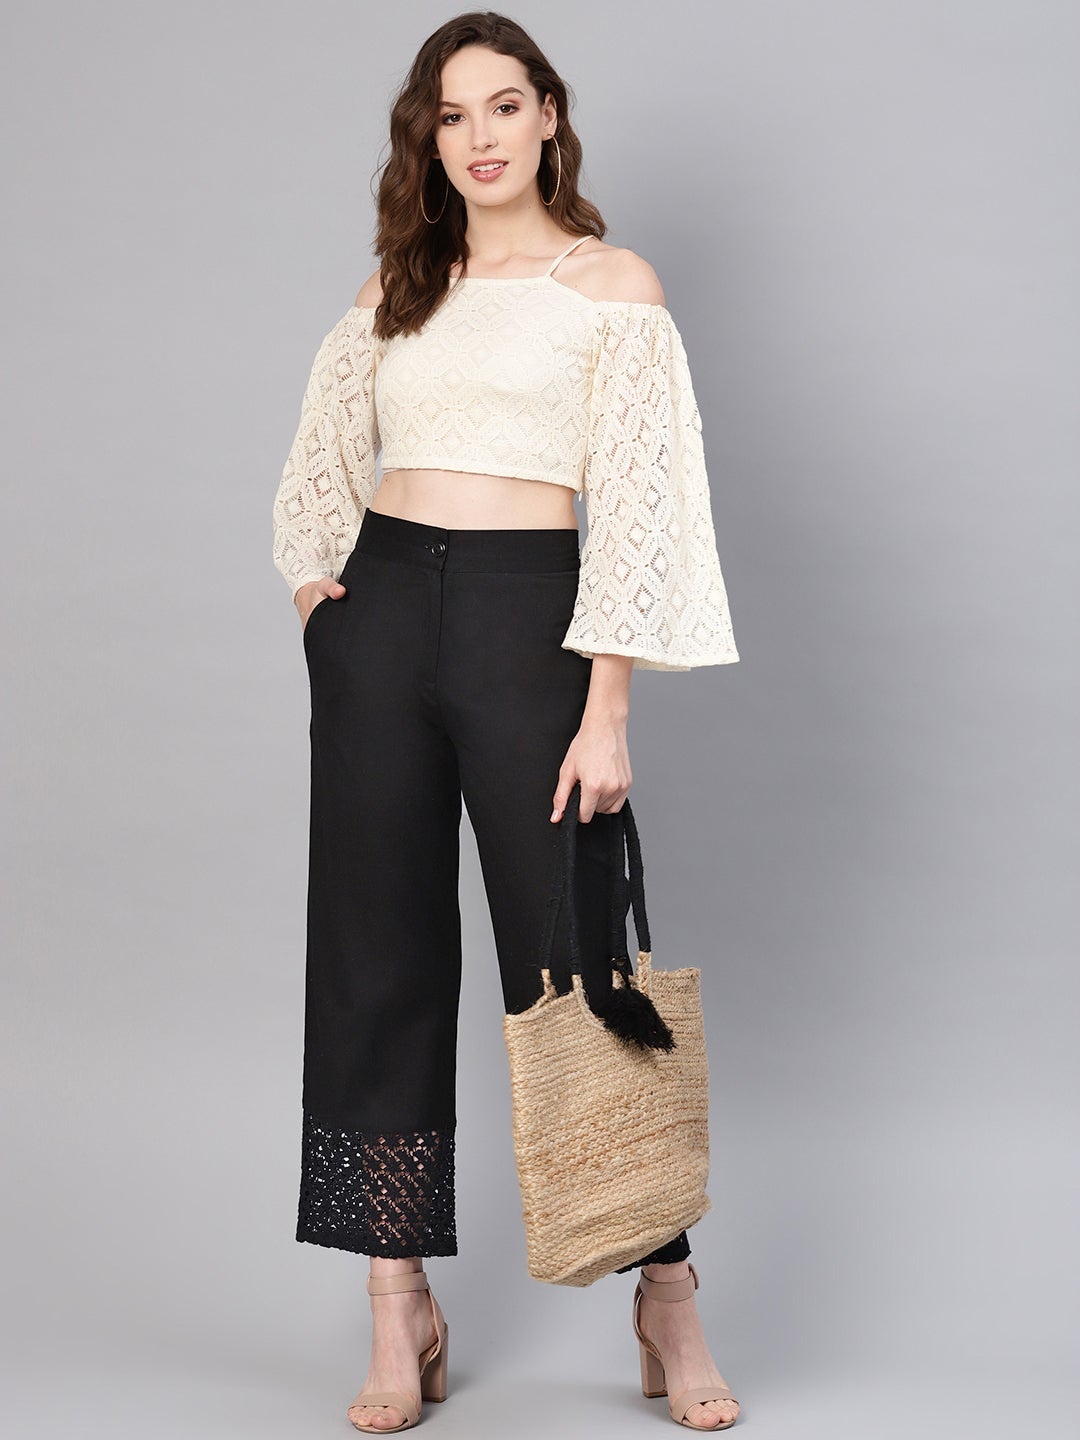 Cotton hakoba printed palazzo pants collection for booking visits  https://ihadesigns.in/products/cotton-hakoba-palazzo-pants-iha-7467 | By  Iha Designs - The Big BoutiqueFacebook